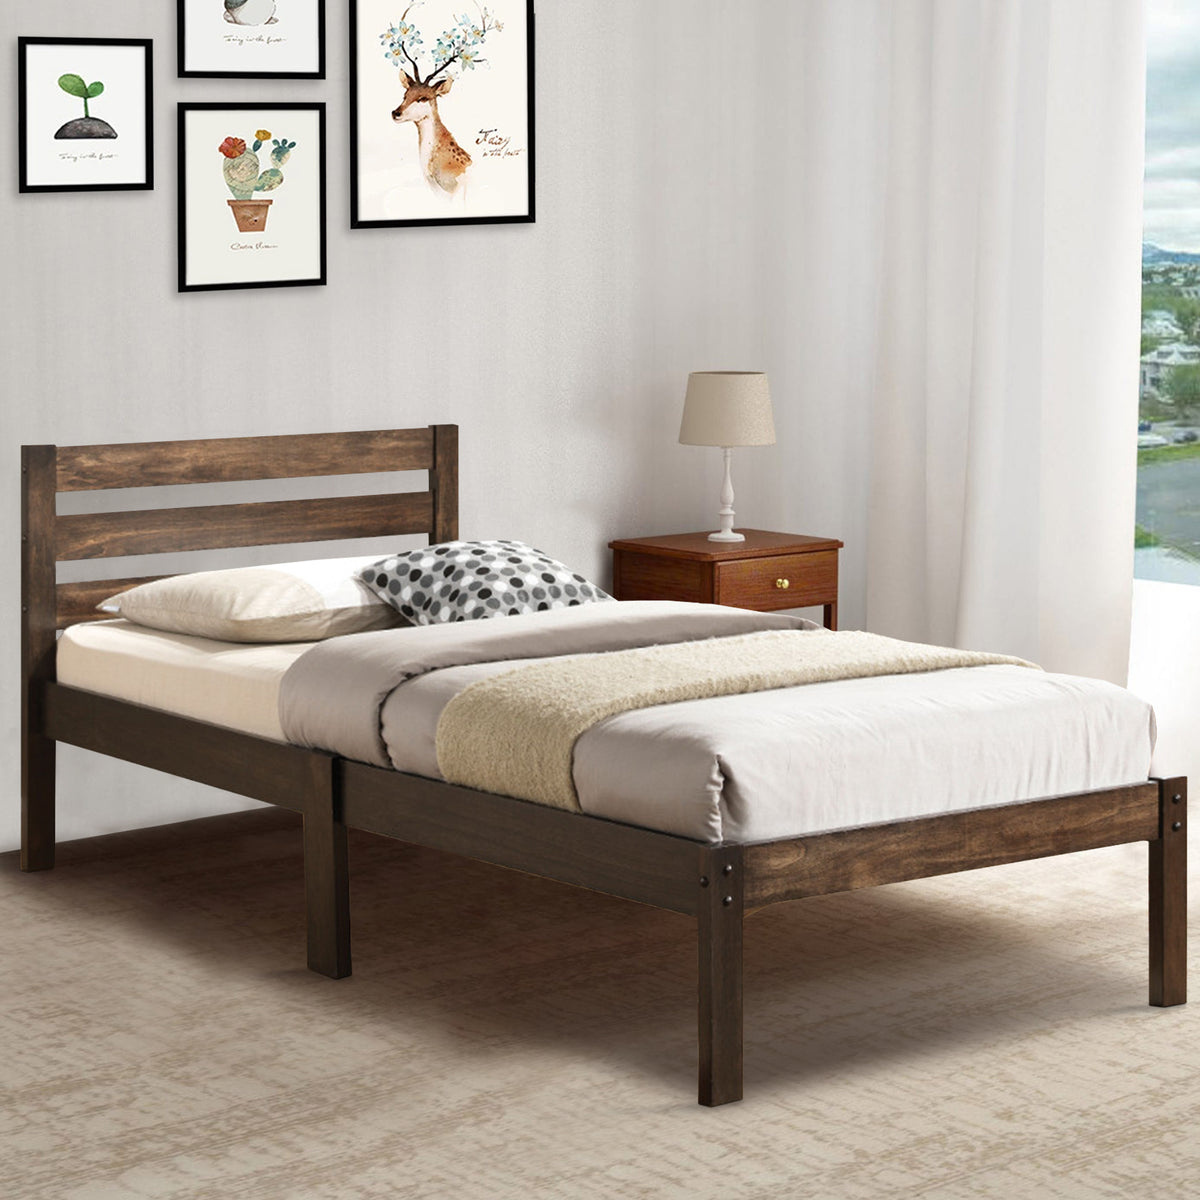 Wooden Twin Size Bed with Slatted Design Headboard, Rustic Brown - BM155990